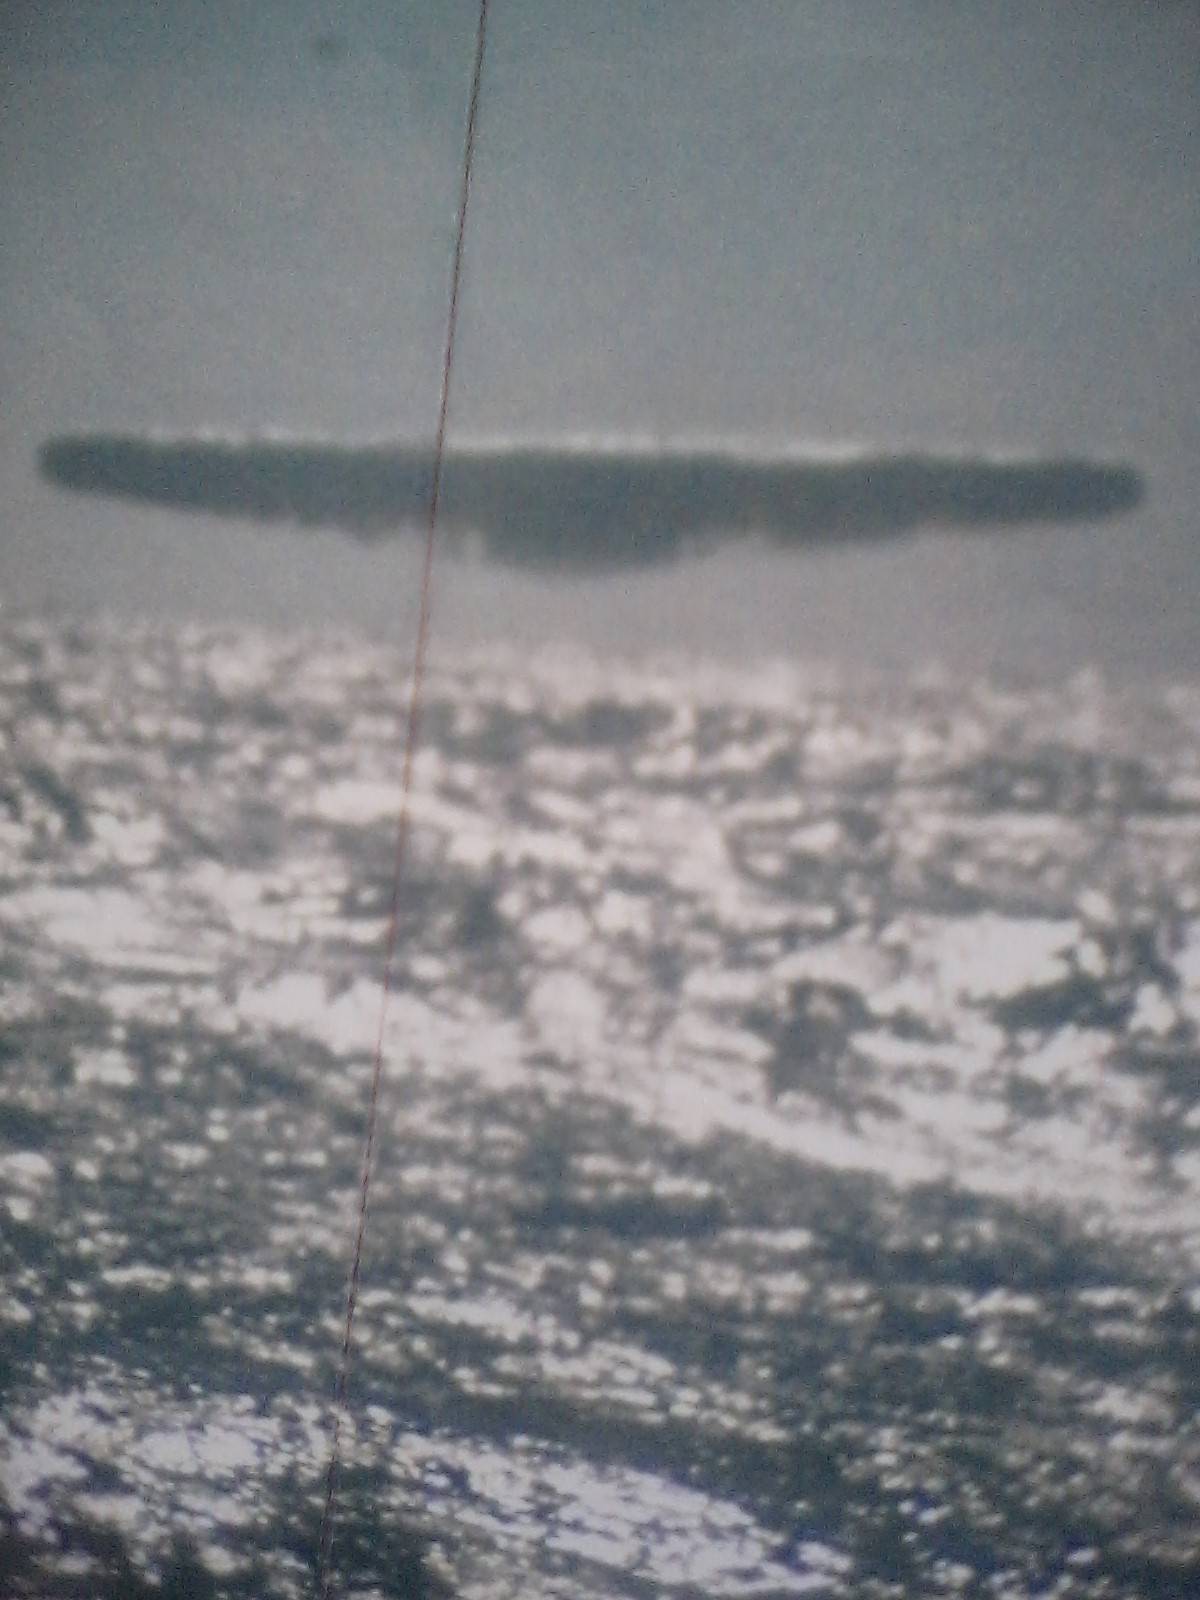 8 Compelling REAL UFO Images photographed from a Navy submarine Image070520151129531